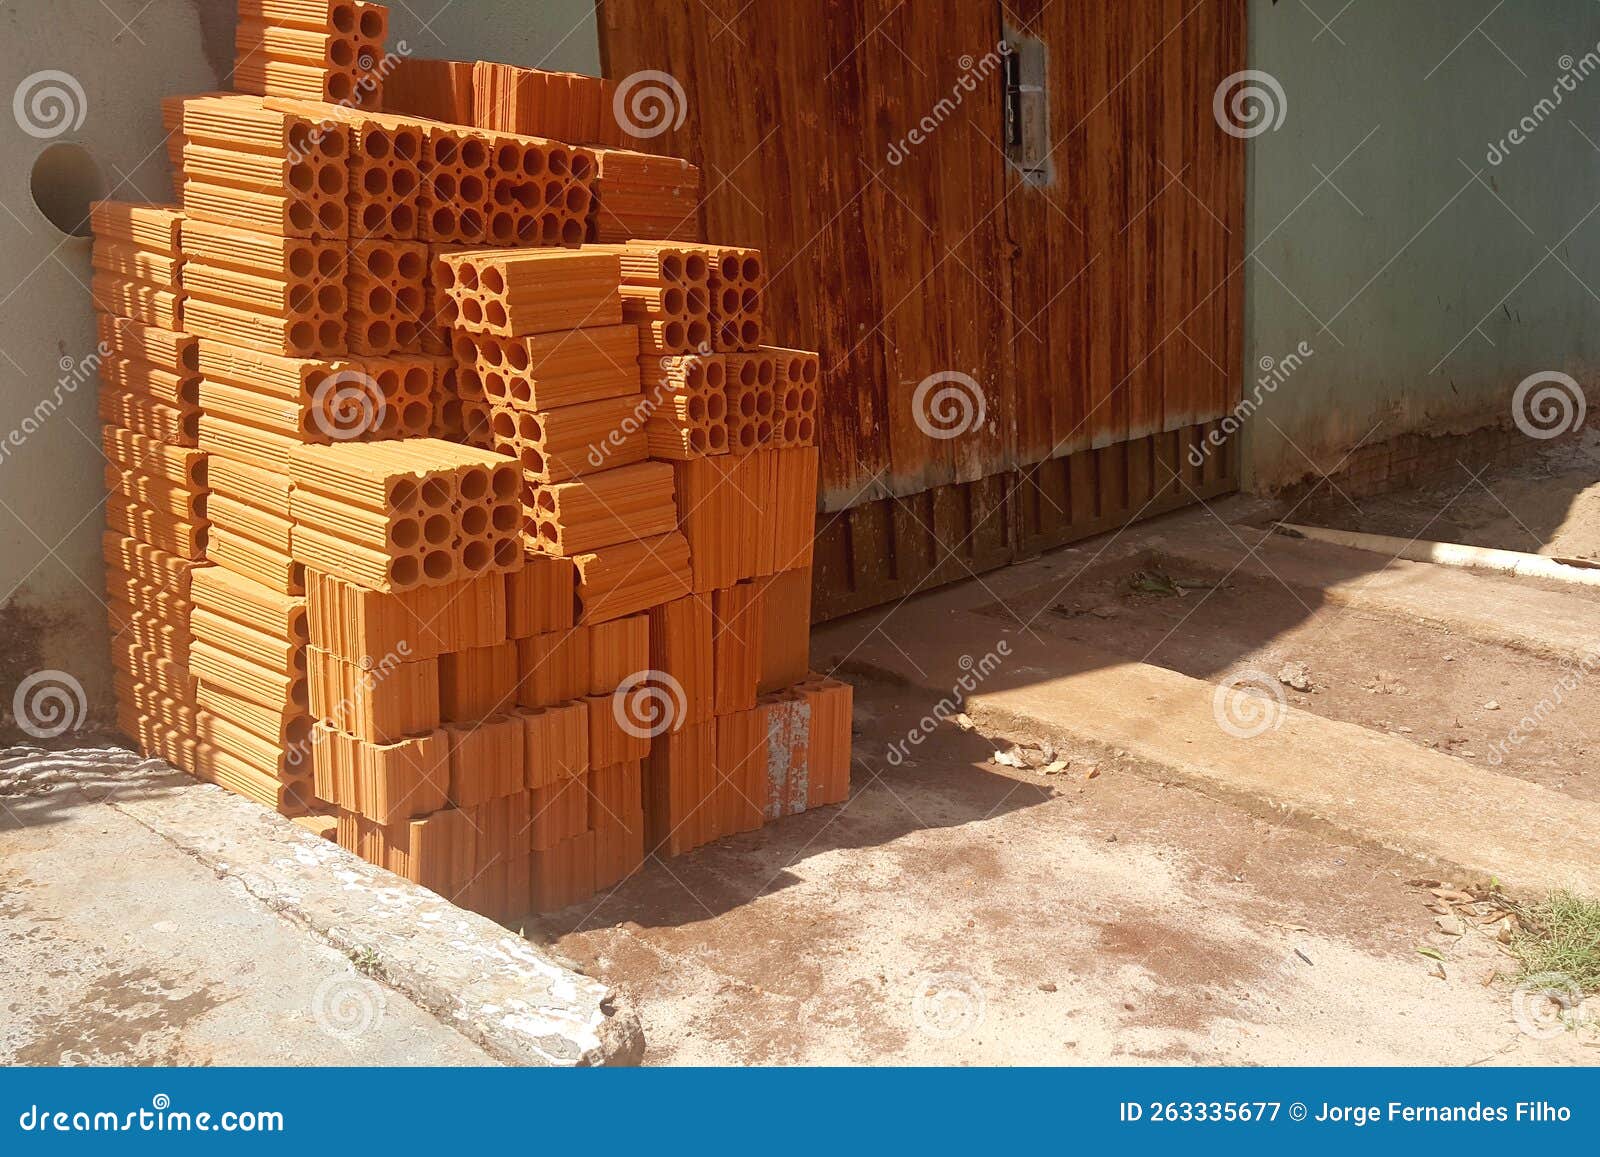 pile of six-hole bricks on the floor, leaning against the wall next to the rusty orange gate